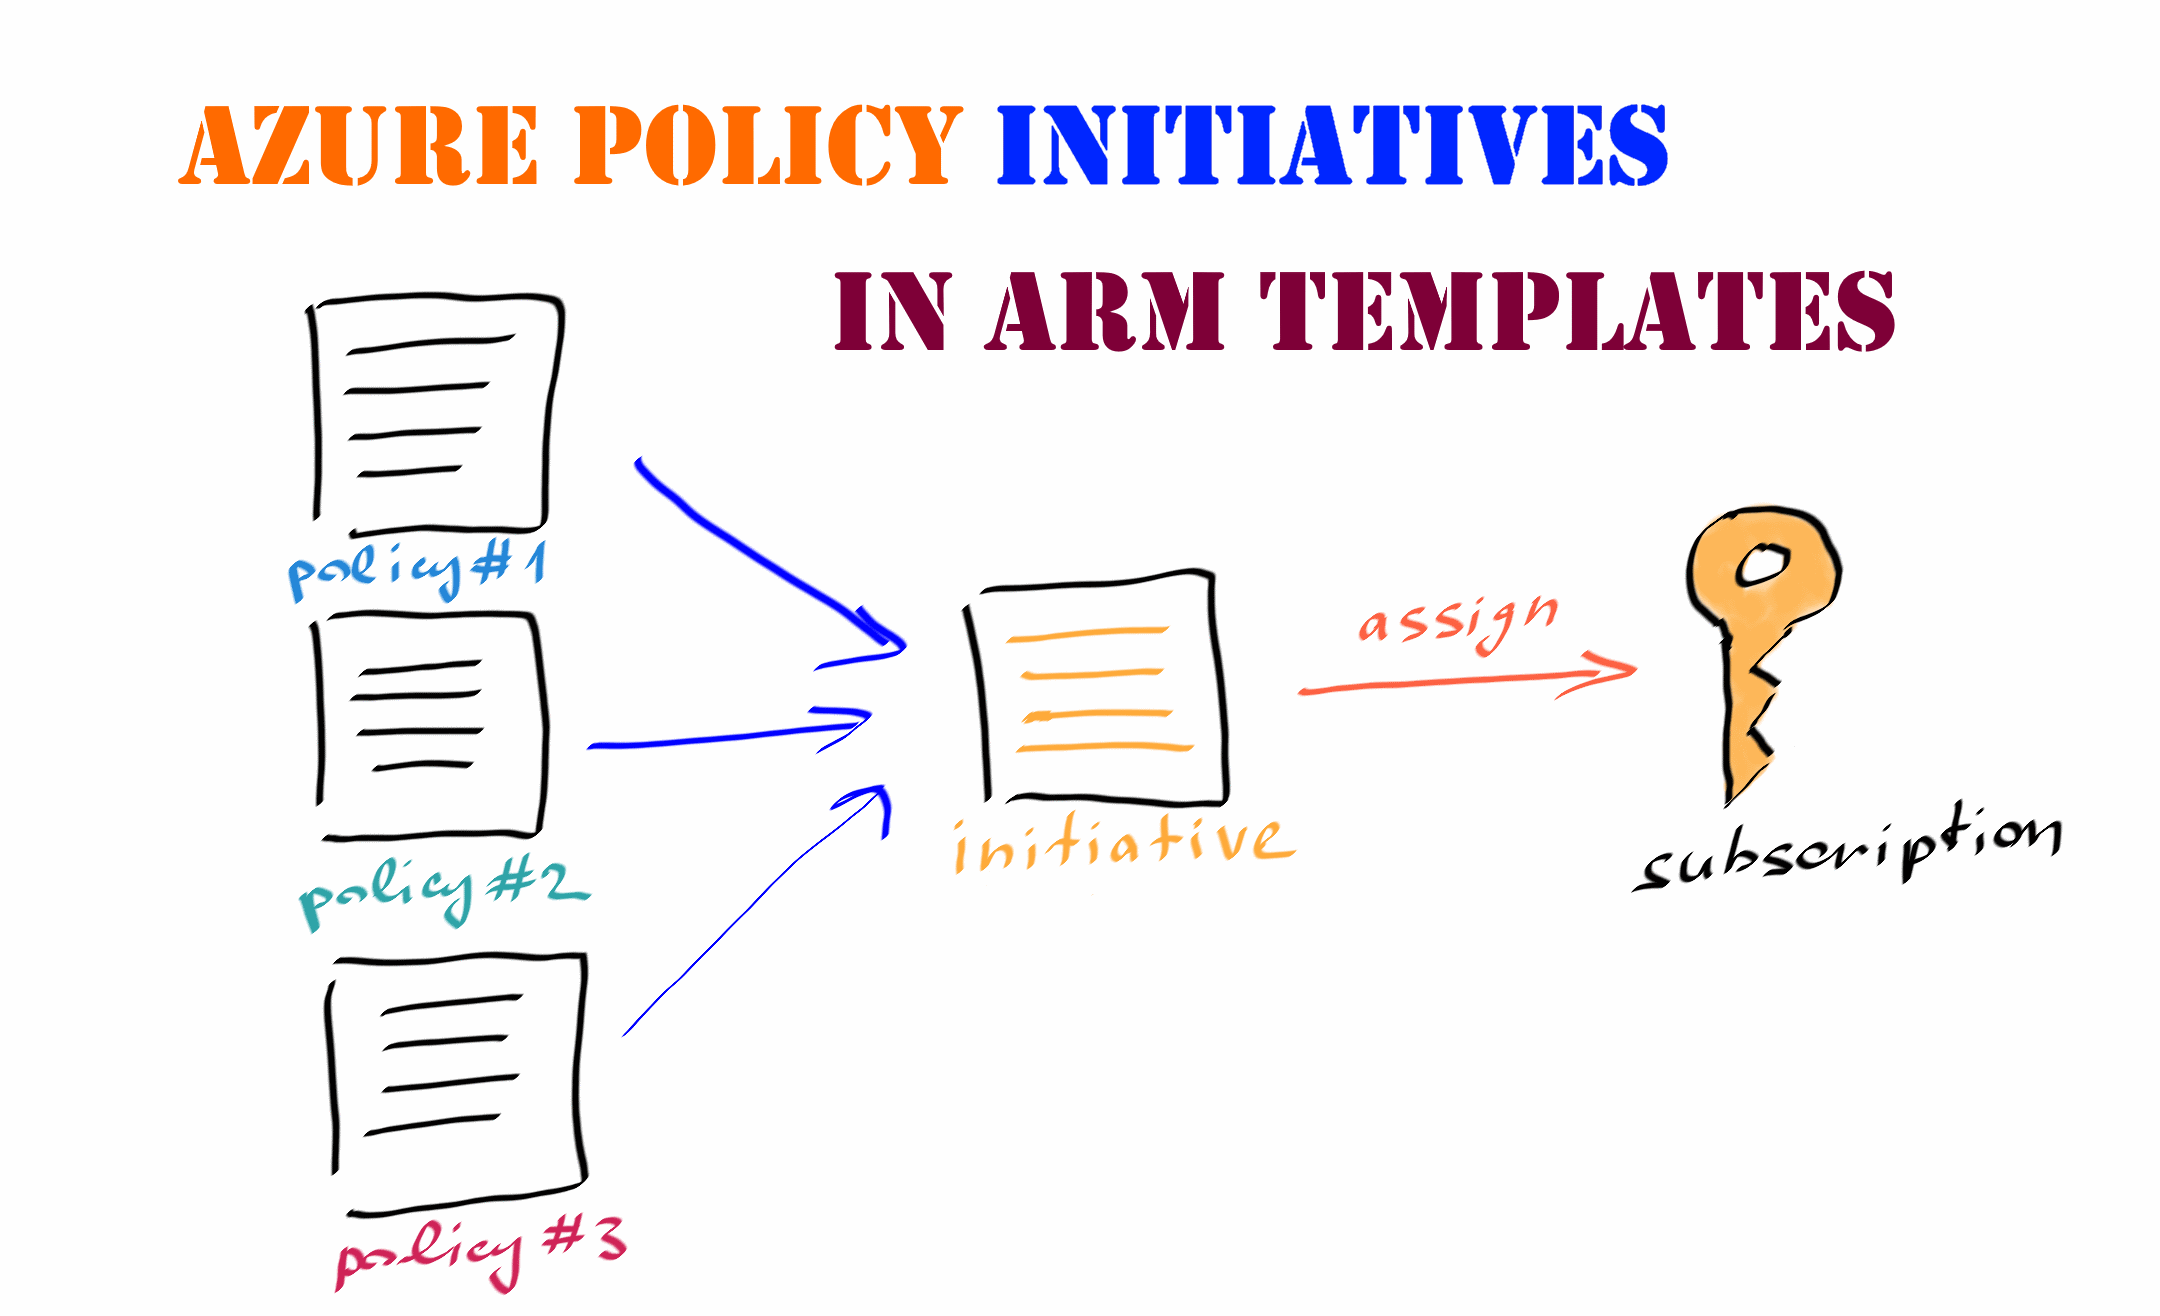 Using ARM templates to deploy Azure Policy initiatives